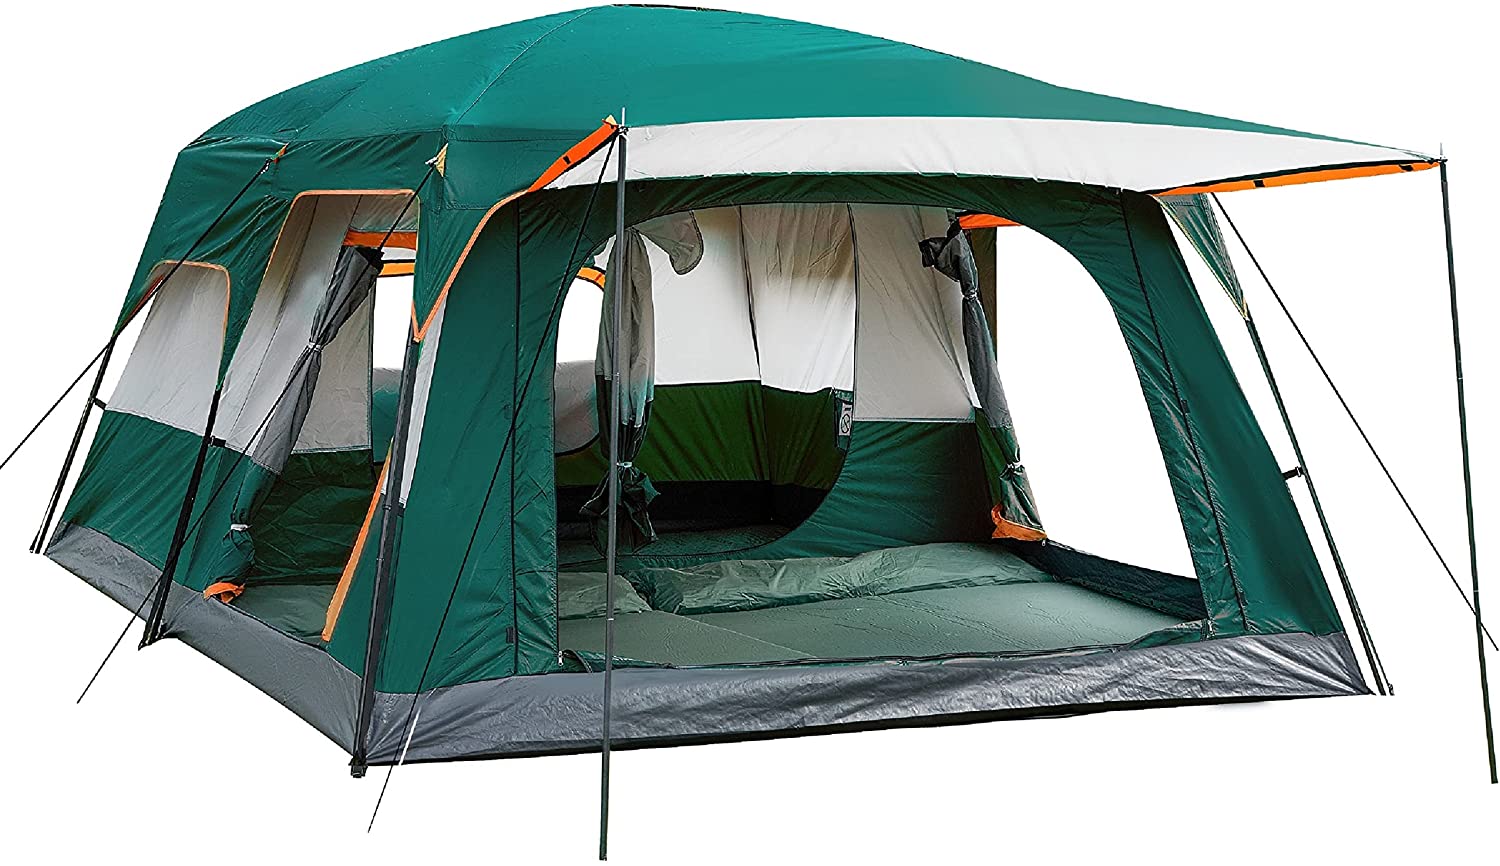 Large camping tents